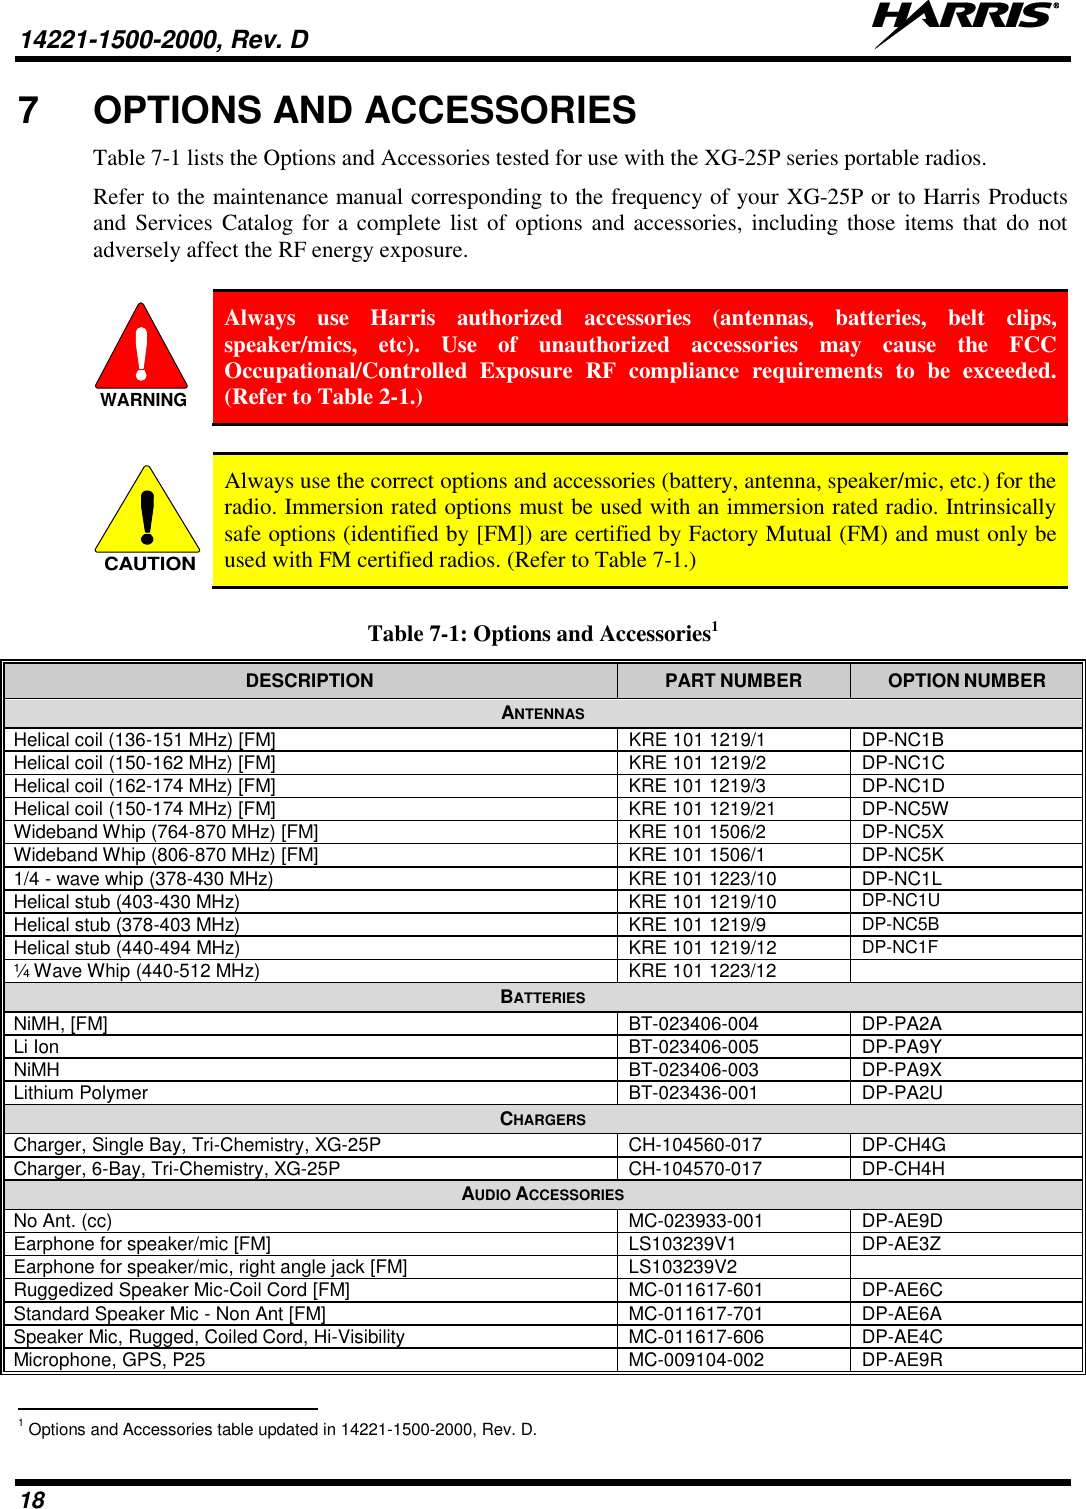 14221-1500-2000, Rev. D   18 7  OPTIONS AND ACCESSORIES Table 7-1 lists the Options and Accessories tested for use with the XG-25P series portable radios.  Refer to the maintenance manual corresponding to the frequency of your XG-25P or to Harris Products and Services Catalog for a complete list of  options and accessories, including those  items that do not adversely affect the RF energy exposure.  WARNING Always  use  Harris  authorized  accessories  (antennas,  batteries,  belt  clips, speaker/mics,  etc).  Use  of  unauthorized  accessories  may  cause  the  FCC Occupational/Controlled  Exposure  RF  compliance  requirements  to  be  exceeded. (Refer to Table 2-1.)  CAUTION Always use the correct options and accessories (battery, antenna, speaker/mic, etc.) for the radio. Immersion rated options must be used with an immersion rated radio. Intrinsically safe options (identified by [FM]) are certified by Factory Mutual (FM) and must only be used with FM certified radios. (Refer to Table 7-1.)  Table 7-1: Options and Accessories1 DESCRIPTION PART NUMBER OPTION NUMBER ANTENNAS Helical coil (136-151 MHz) [FM] KRE 101 1219/1 DP-NC1B Helical coil (150-162 MHz) [FM] KRE 101 1219/2 DP-NC1C Helical coil (162-174 MHz) [FM] KRE 101 1219/3 DP-NC1D Helical coil (150-174 MHz) [FM] KRE 101 1219/21 DP-NC5W Wideband Whip (764-870 MHz) [FM] KRE 101 1506/2 DP-NC5X Wideband Whip (806-870 MHz) [FM] KRE 101 1506/1 DP-NC5K 1/4 - wave whip (378-430 MHz)  KRE 101 1223/10 DP-NC1L Helical stub (403-430 MHz) KRE 101 1219/10 DP-NC1U Helical stub (378-403 MHz) KRE 101 1219/9 DP-NC5B Helical stub (440-494 MHz) KRE 101 1219/12 DP-NC1F ¼ Wave Whip (440-512 MHz) KRE 101 1223/12  BATTERIES NiMH, [FM] BT-023406-004 DP-PA2A Li Ion  BT-023406-005 DP-PA9Y NiMH  BT-023406-003 DP-PA9X Lithium Polymer  BT-023436-001 DP-PA2U CHARGERS Charger, Single Bay, Tri-Chemistry, XG-25P CH-104560-017 DP-CH4G Charger, 6-Bay, Tri-Chemistry, XG-25P CH-104570-017 DP-CH4H AUDIO ACCESSORIES No Ant. (cc) MC-023933-001 DP-AE9D Earphone for speaker/mic [FM] LS103239V1 DP-AE3Z Earphone for speaker/mic, right angle jack [FM] LS103239V2  Ruggedized Speaker Mic-Coil Cord [FM] MC-011617-601 DP-AE6C Standard Speaker Mic - Non Ant [FM] MC-011617-701 DP-AE6A Speaker Mic, Rugged, Coiled Cord, Hi-Visibility MC-011617-606 DP-AE4C Microphone, GPS, P25 MC-009104-002 DP-AE9R                                                       1 Options and Accessories table updated in 14221-1500-2000, Rev. D. 